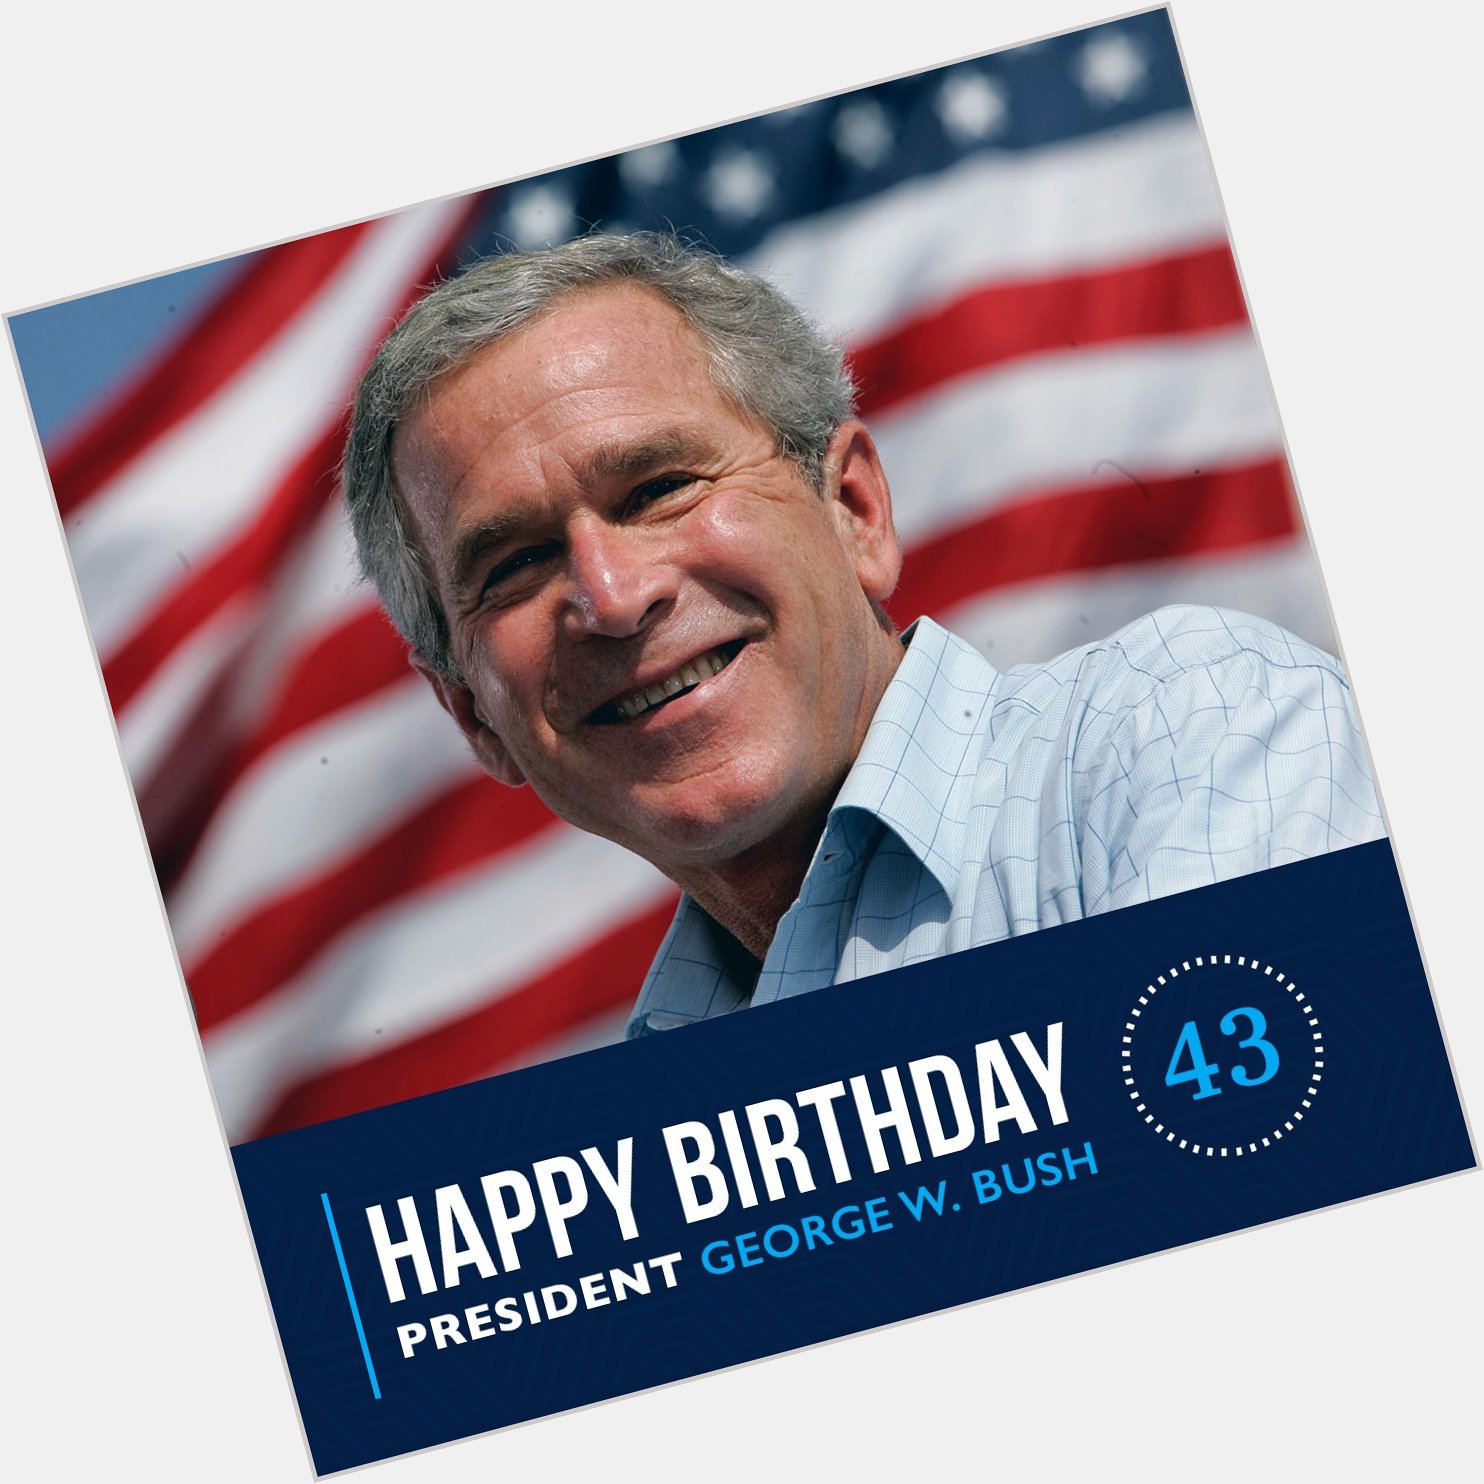 Please remessage to wish Happy Birthday to former President George W. Bush! 